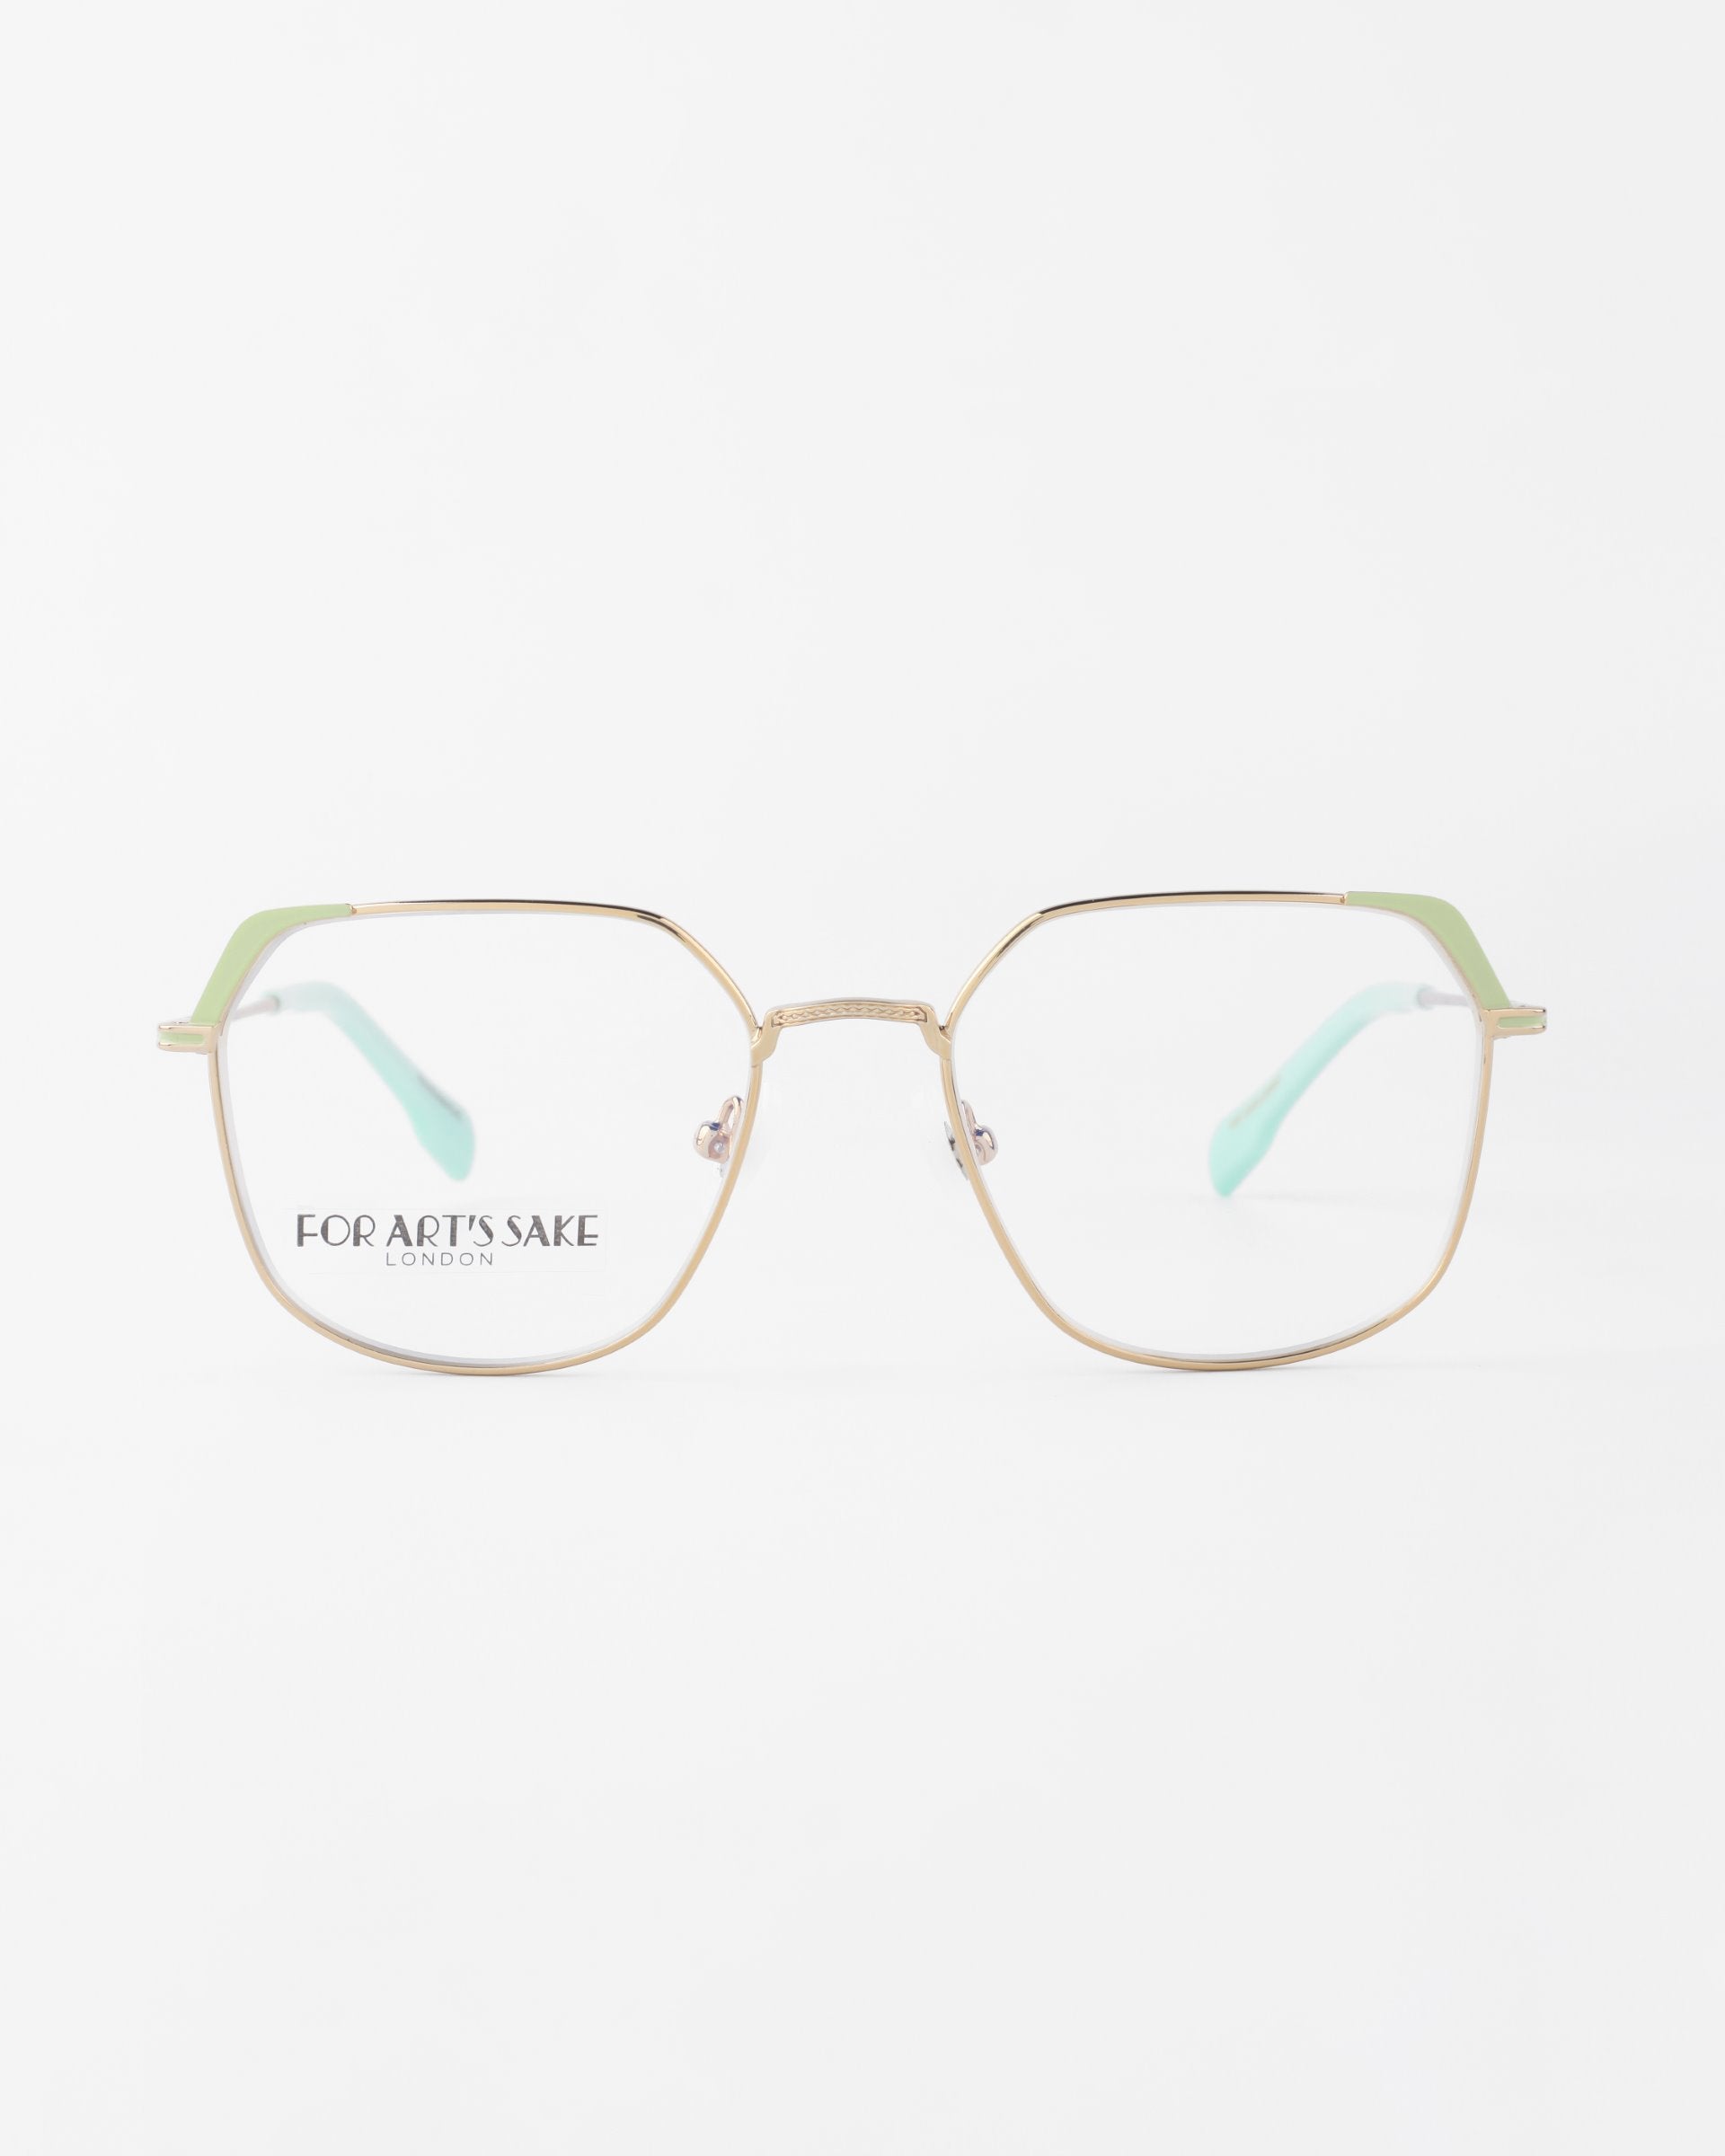 A pair of eyeglasses with a thin metallic frame featuring a hexagonal shape. The temples are light green, and there is text on the left lens reading &quot;FOR ART&#39;S SAKE LONDON&quot;. These stylish Godiva glasses from For Art&#39;s Sake® offer UVA &amp; UVB protection, perfect for sunny days. The background is plain white.